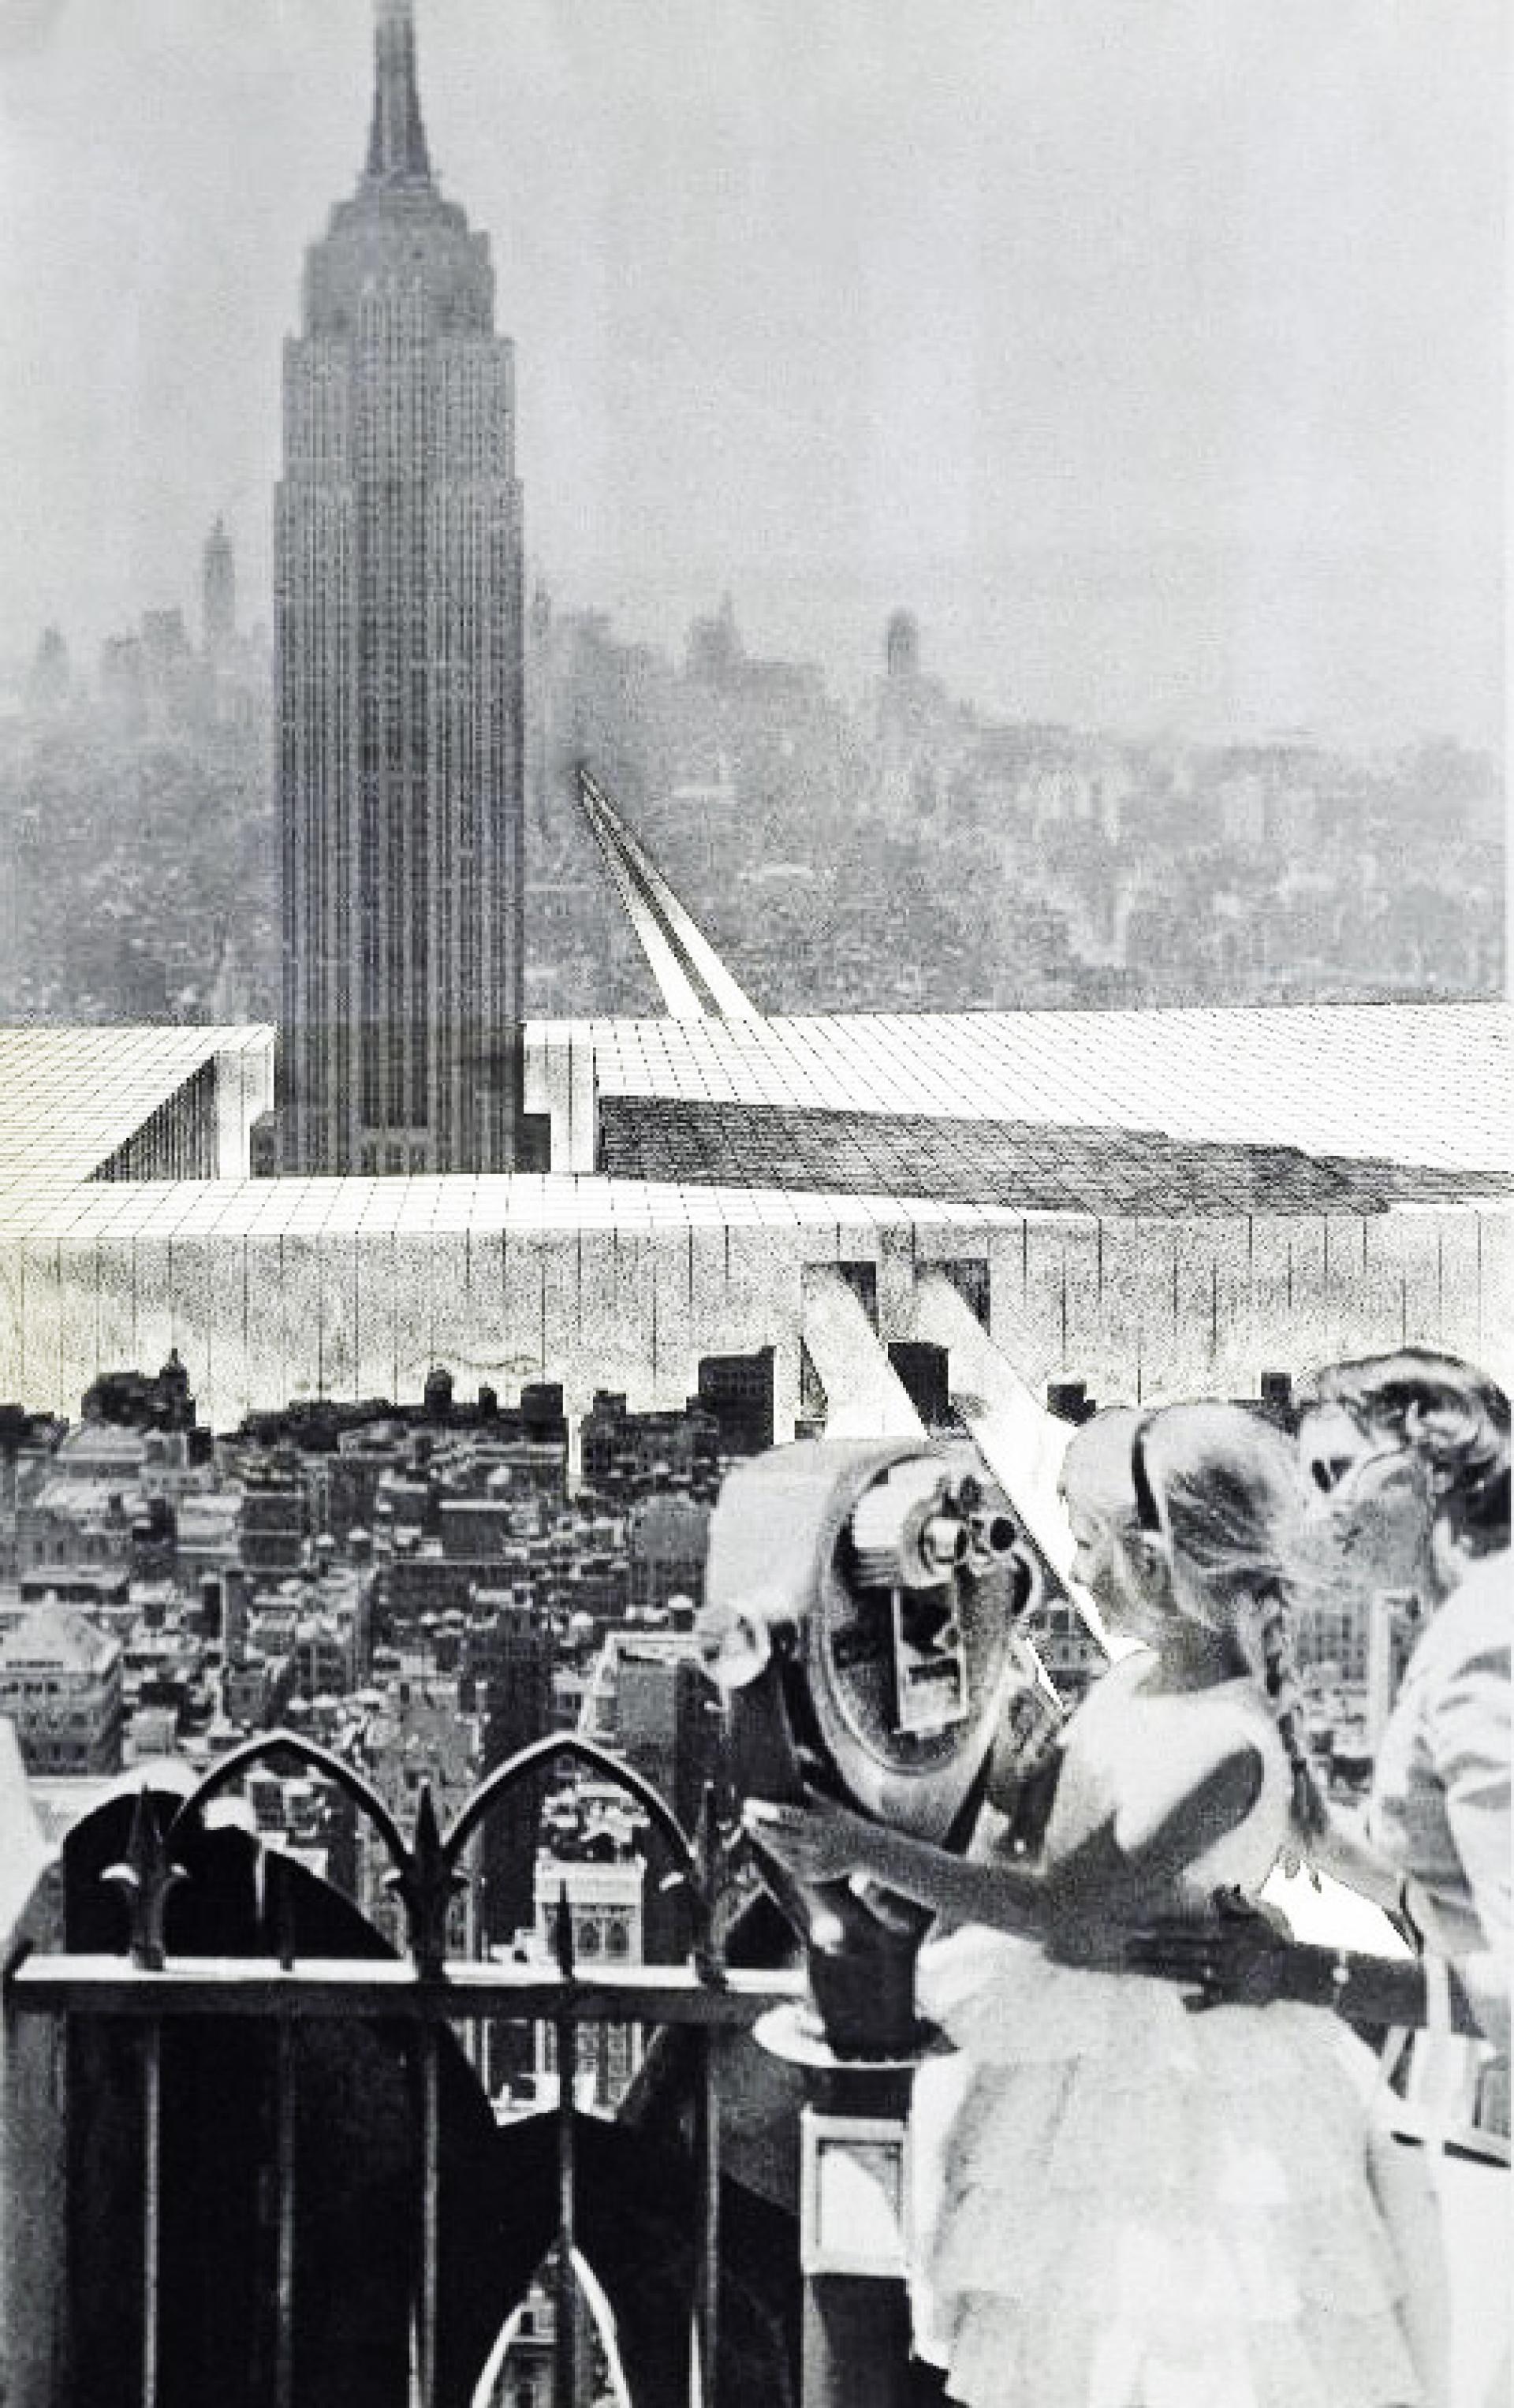 Fragment of the Continuous Monument entitled Manhattan Empire State Building, Superstudio (1969-70)